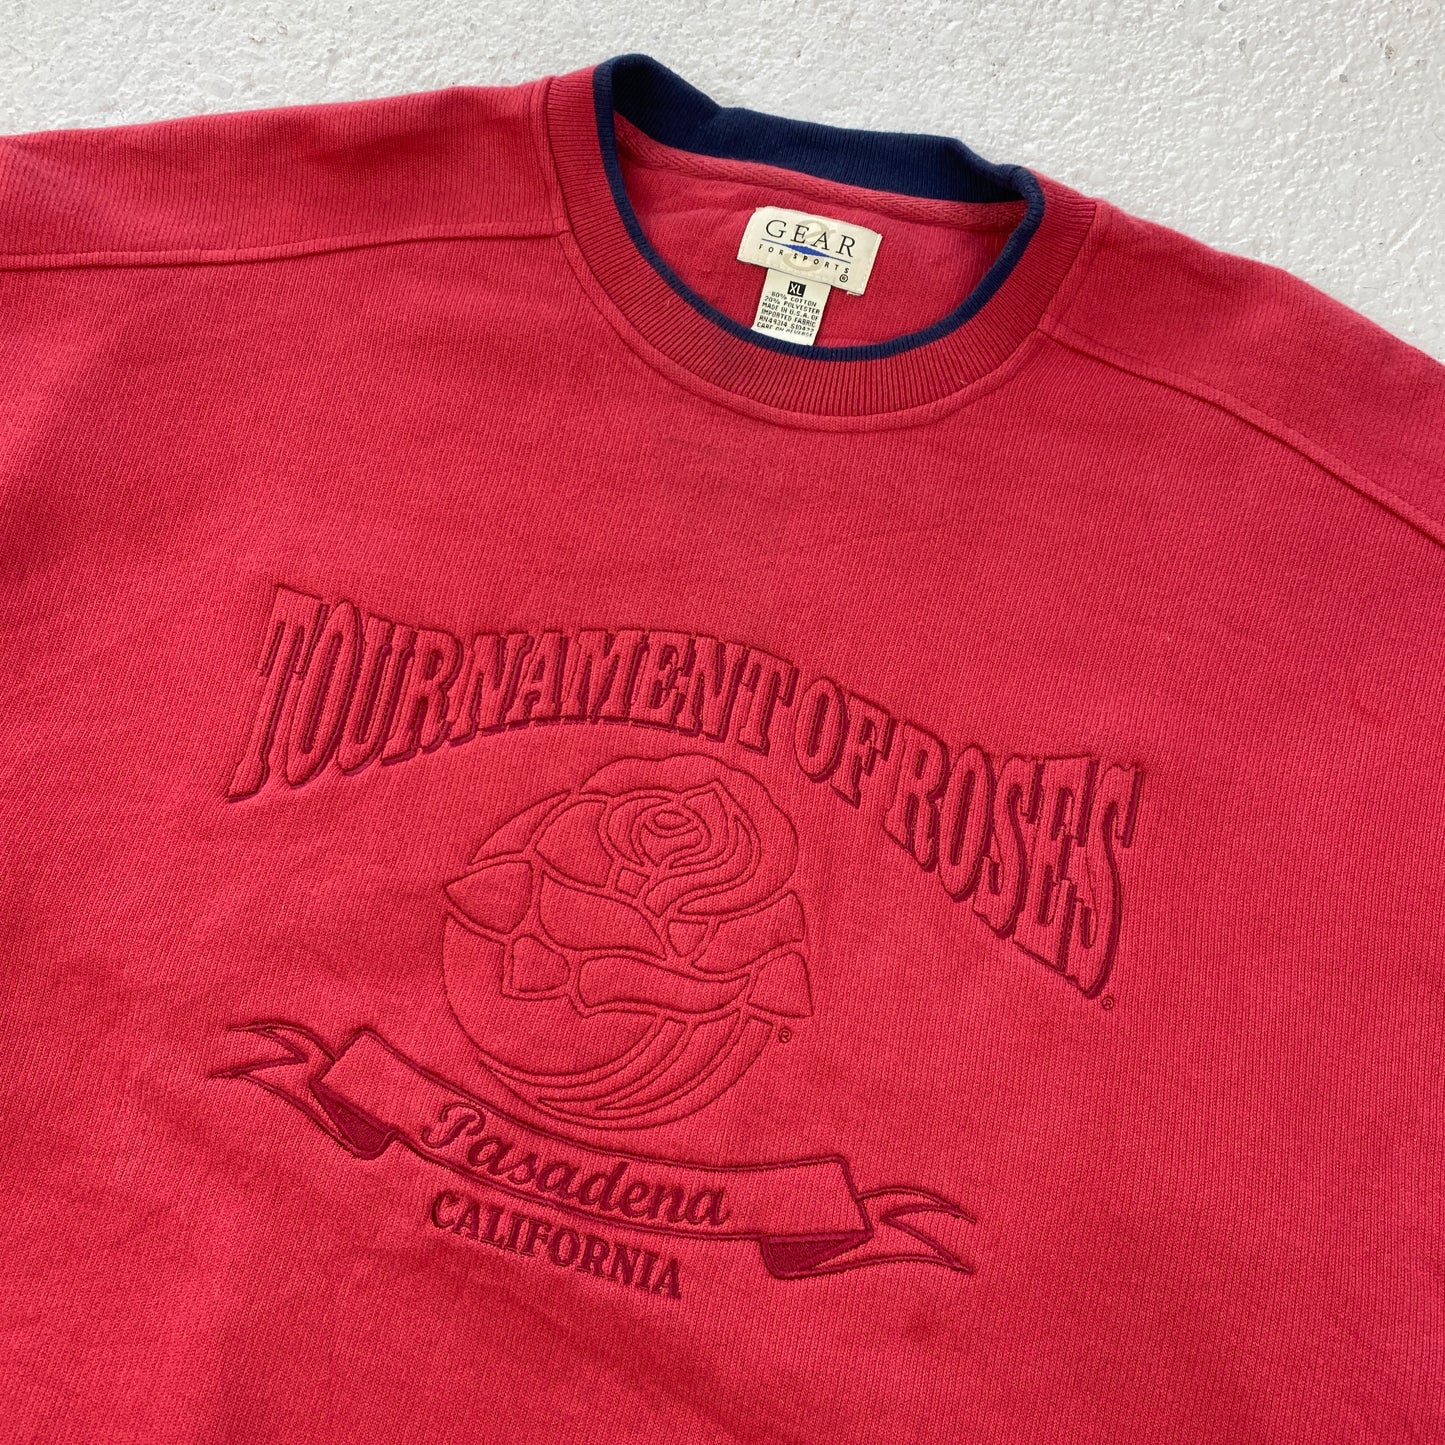 Tournament of Roses heavyweight sweater (XL)